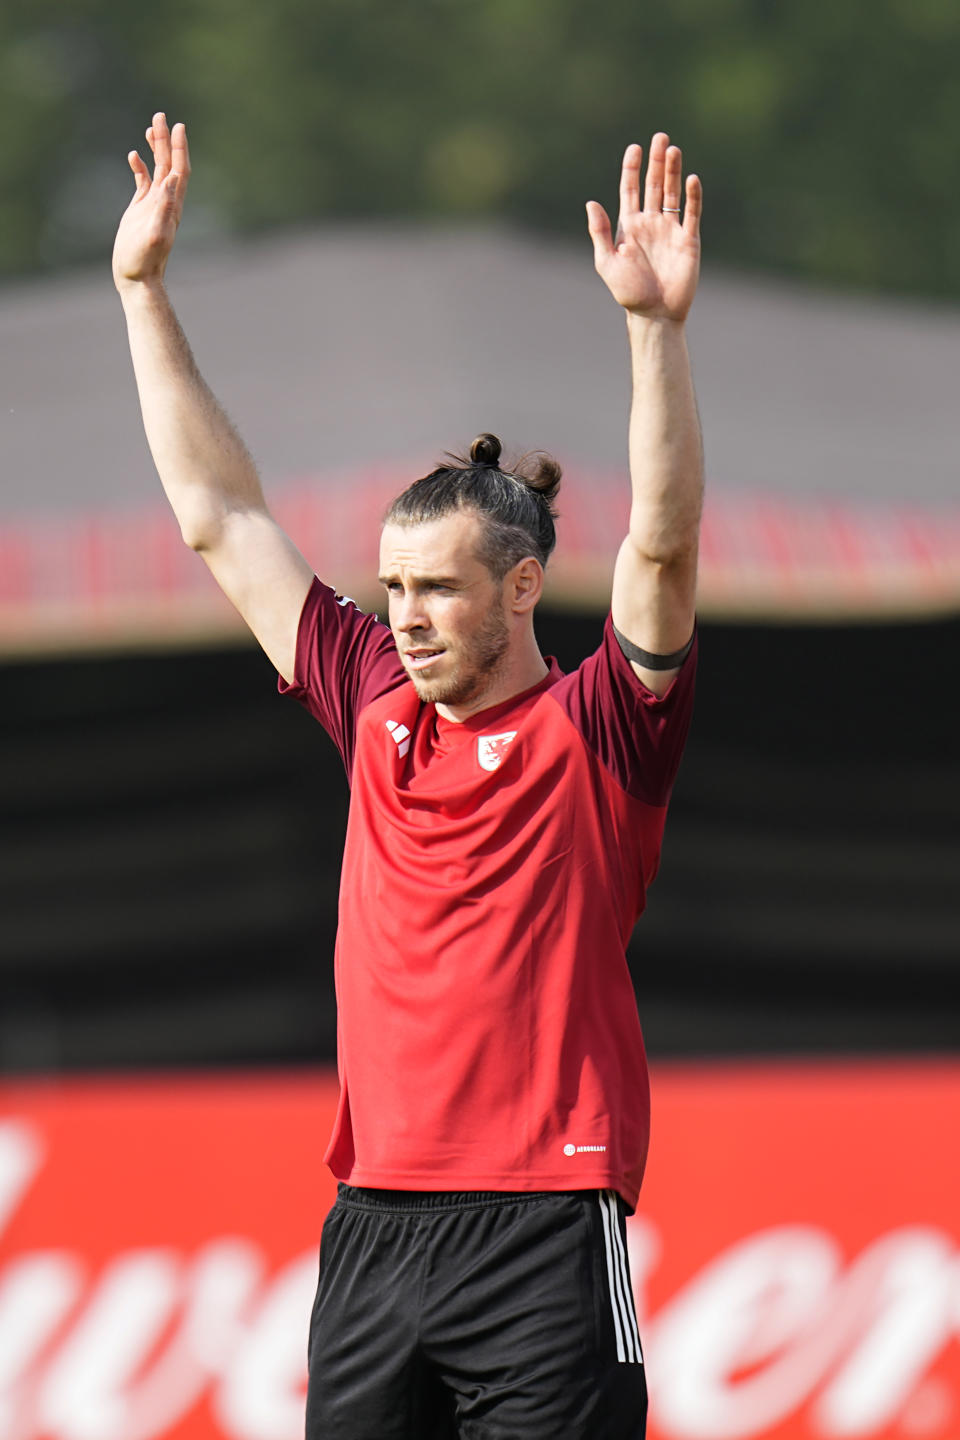 Wales' Gareth Bale gestures during Wales' official training session on the eve of the group B World Cup soccer match between USA and Wales, in Doha, Qatar, Sunday, Nov. 20, 2022. (AP Photo/Aijaz Rahi)